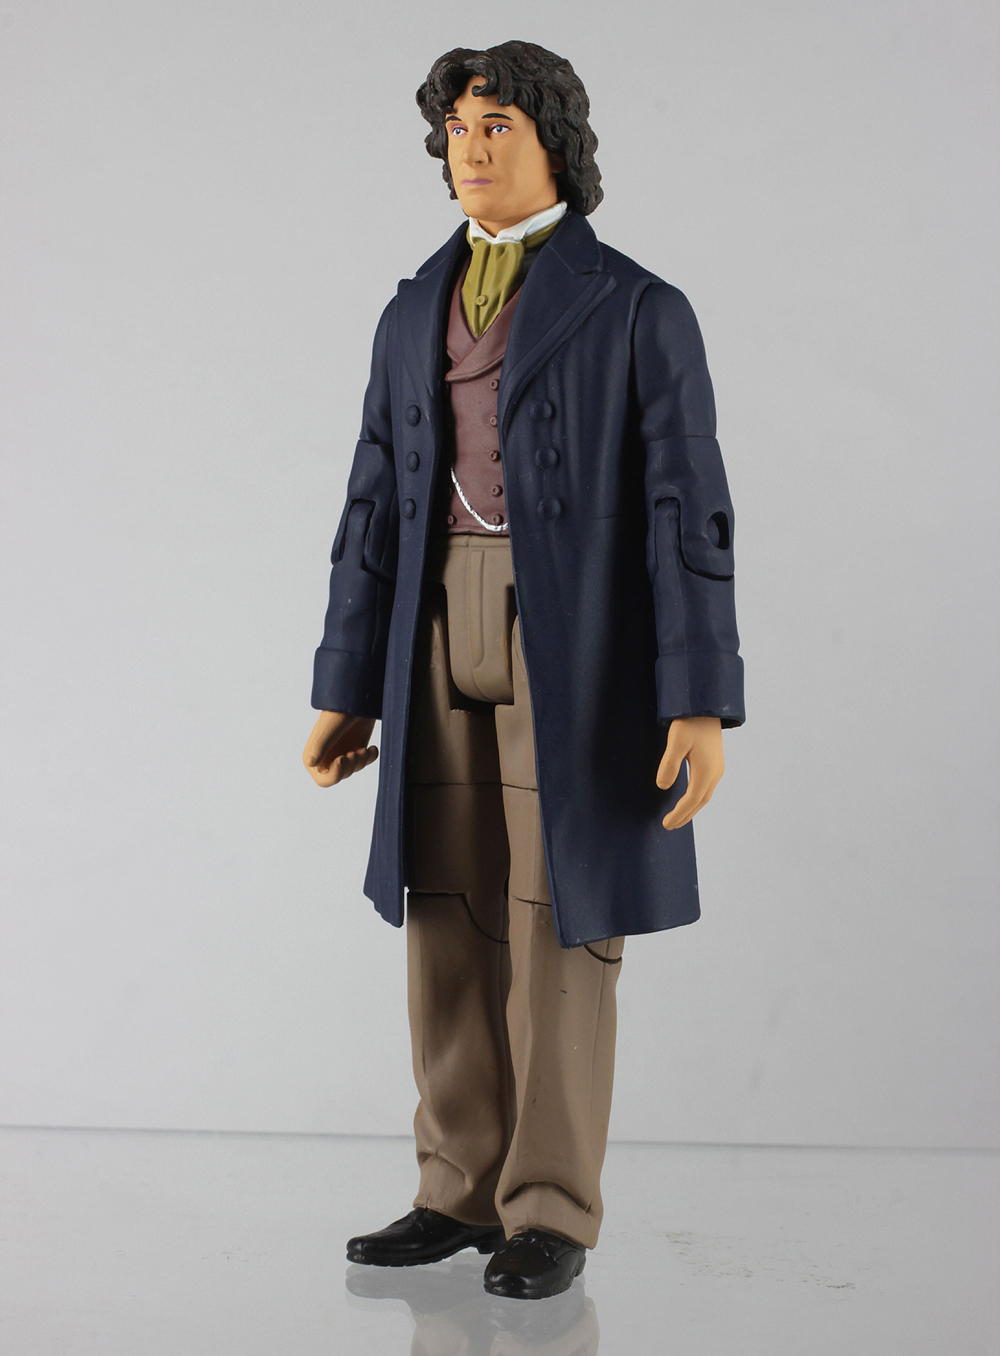 Eighth Doctor from Toys R Us Exclusive